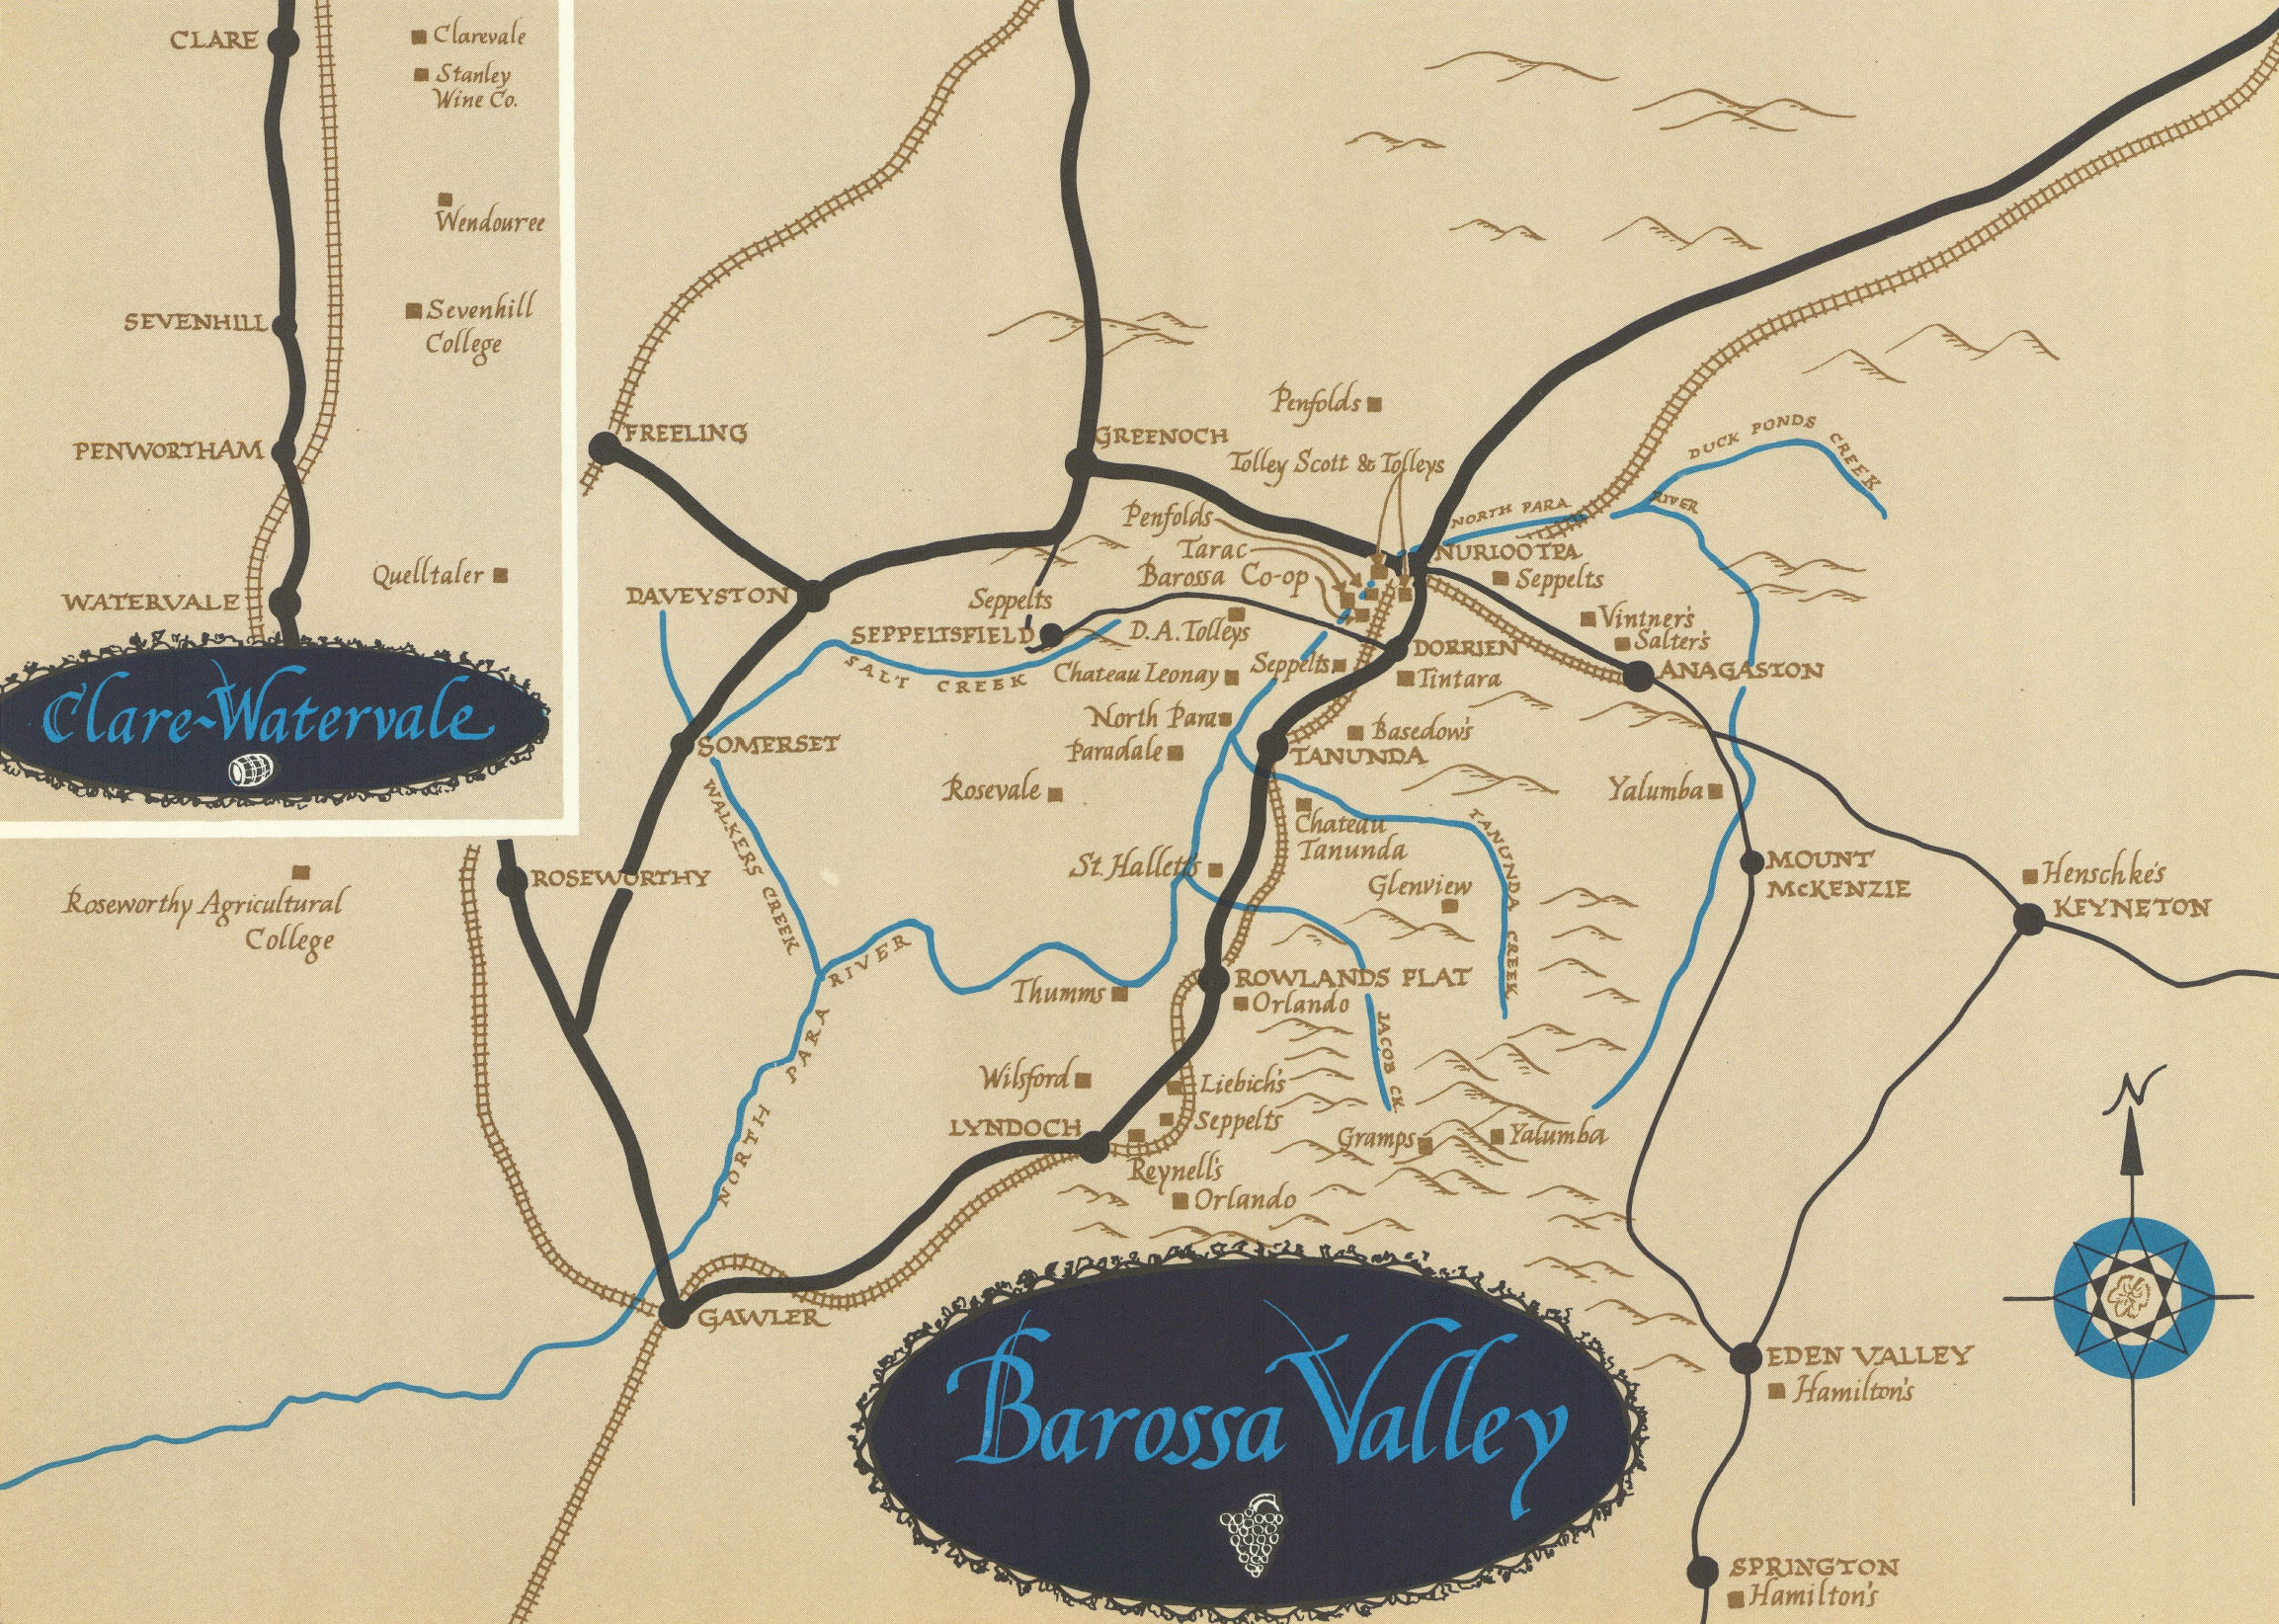 Associate Product Clare, Watervale & Barossa Valley. South Australia wineries 1966 old map